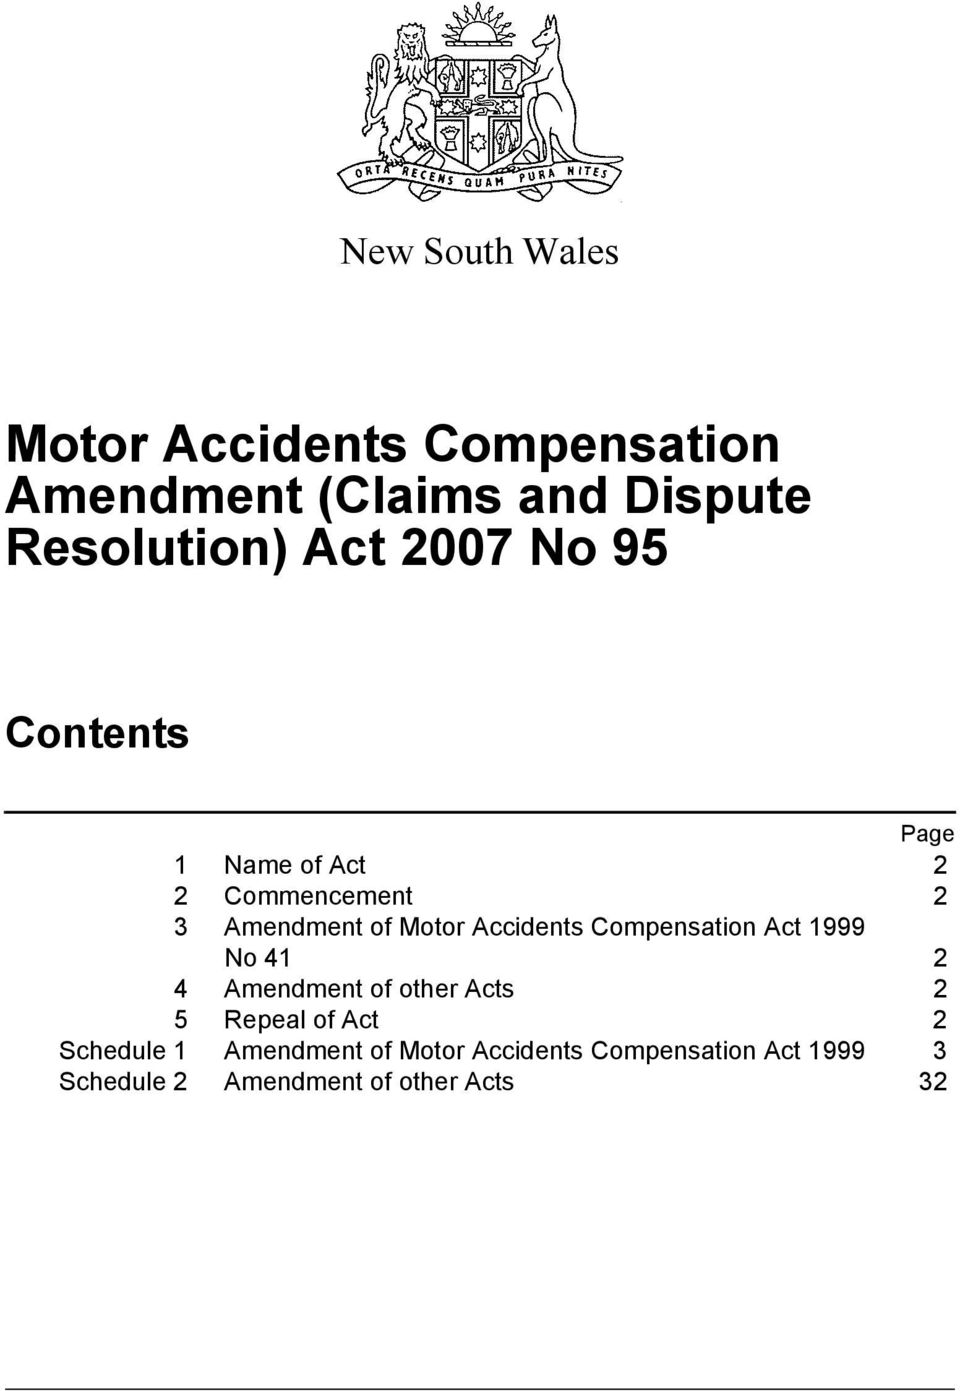 Compensation Act 1999 No 41 2 4 Amendment of other Acts 2 5 Repeal of Act 2